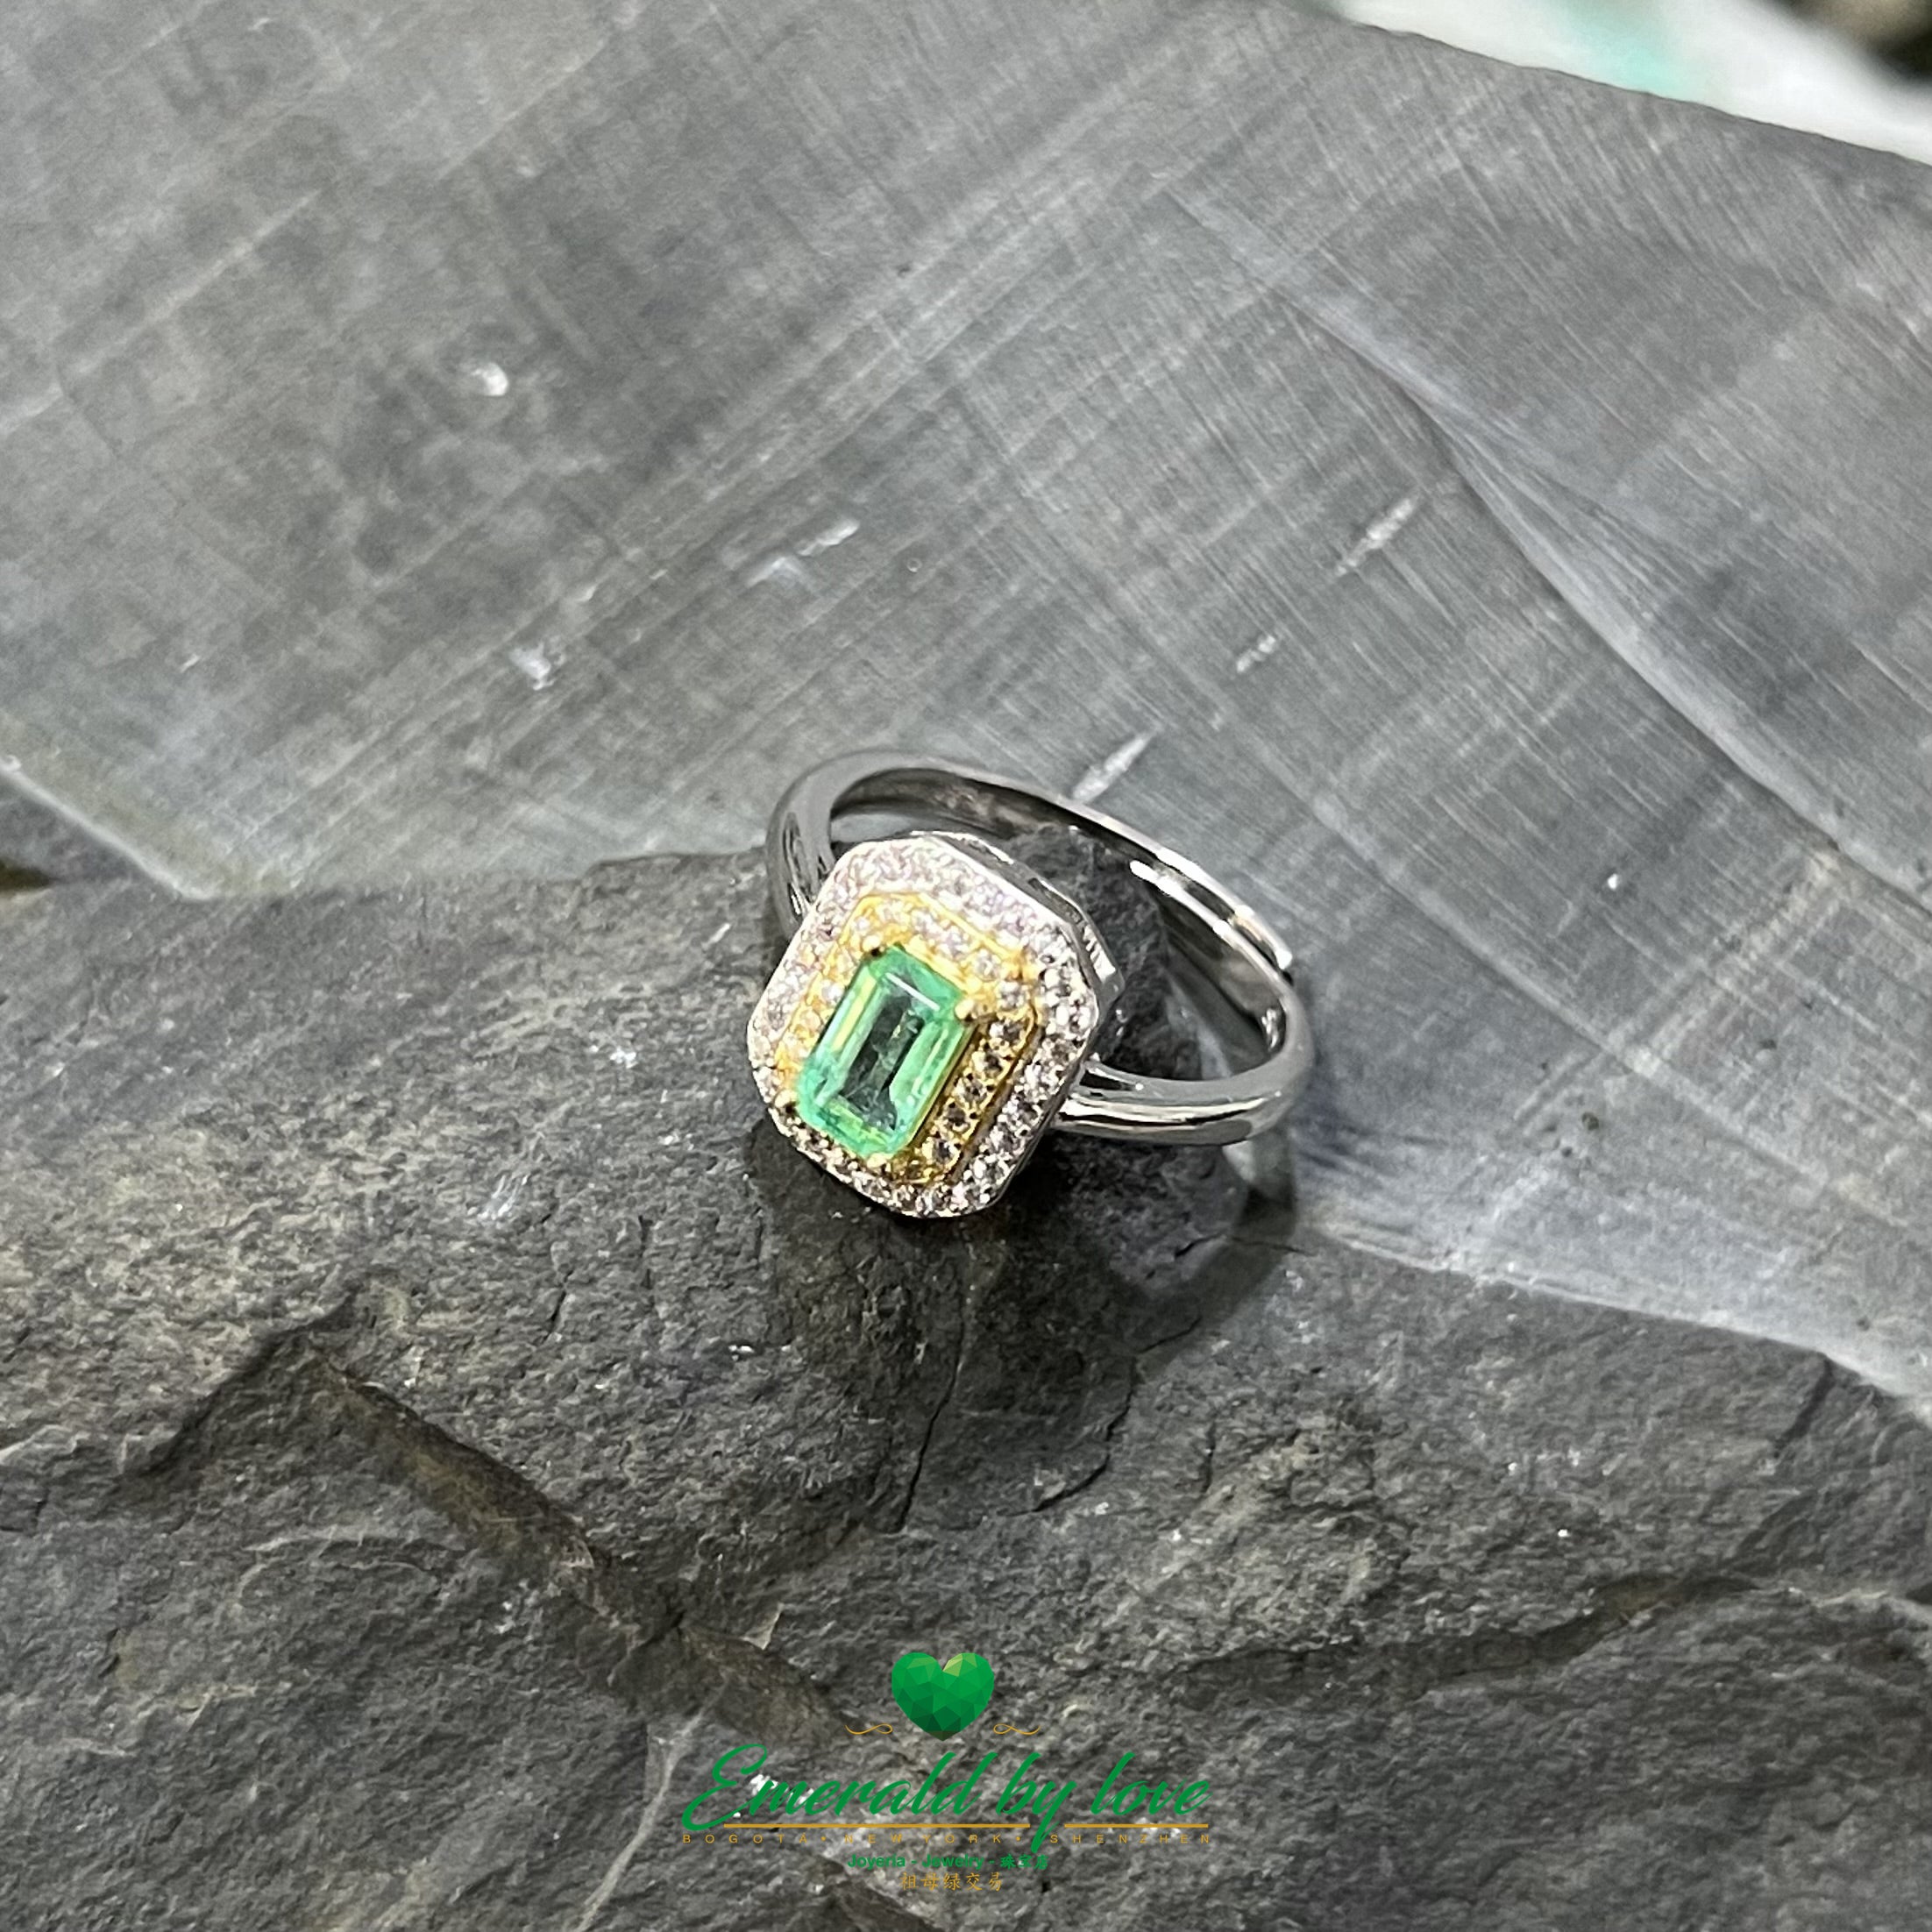 Rectangular Gold-Plated Ring with Central Emerald